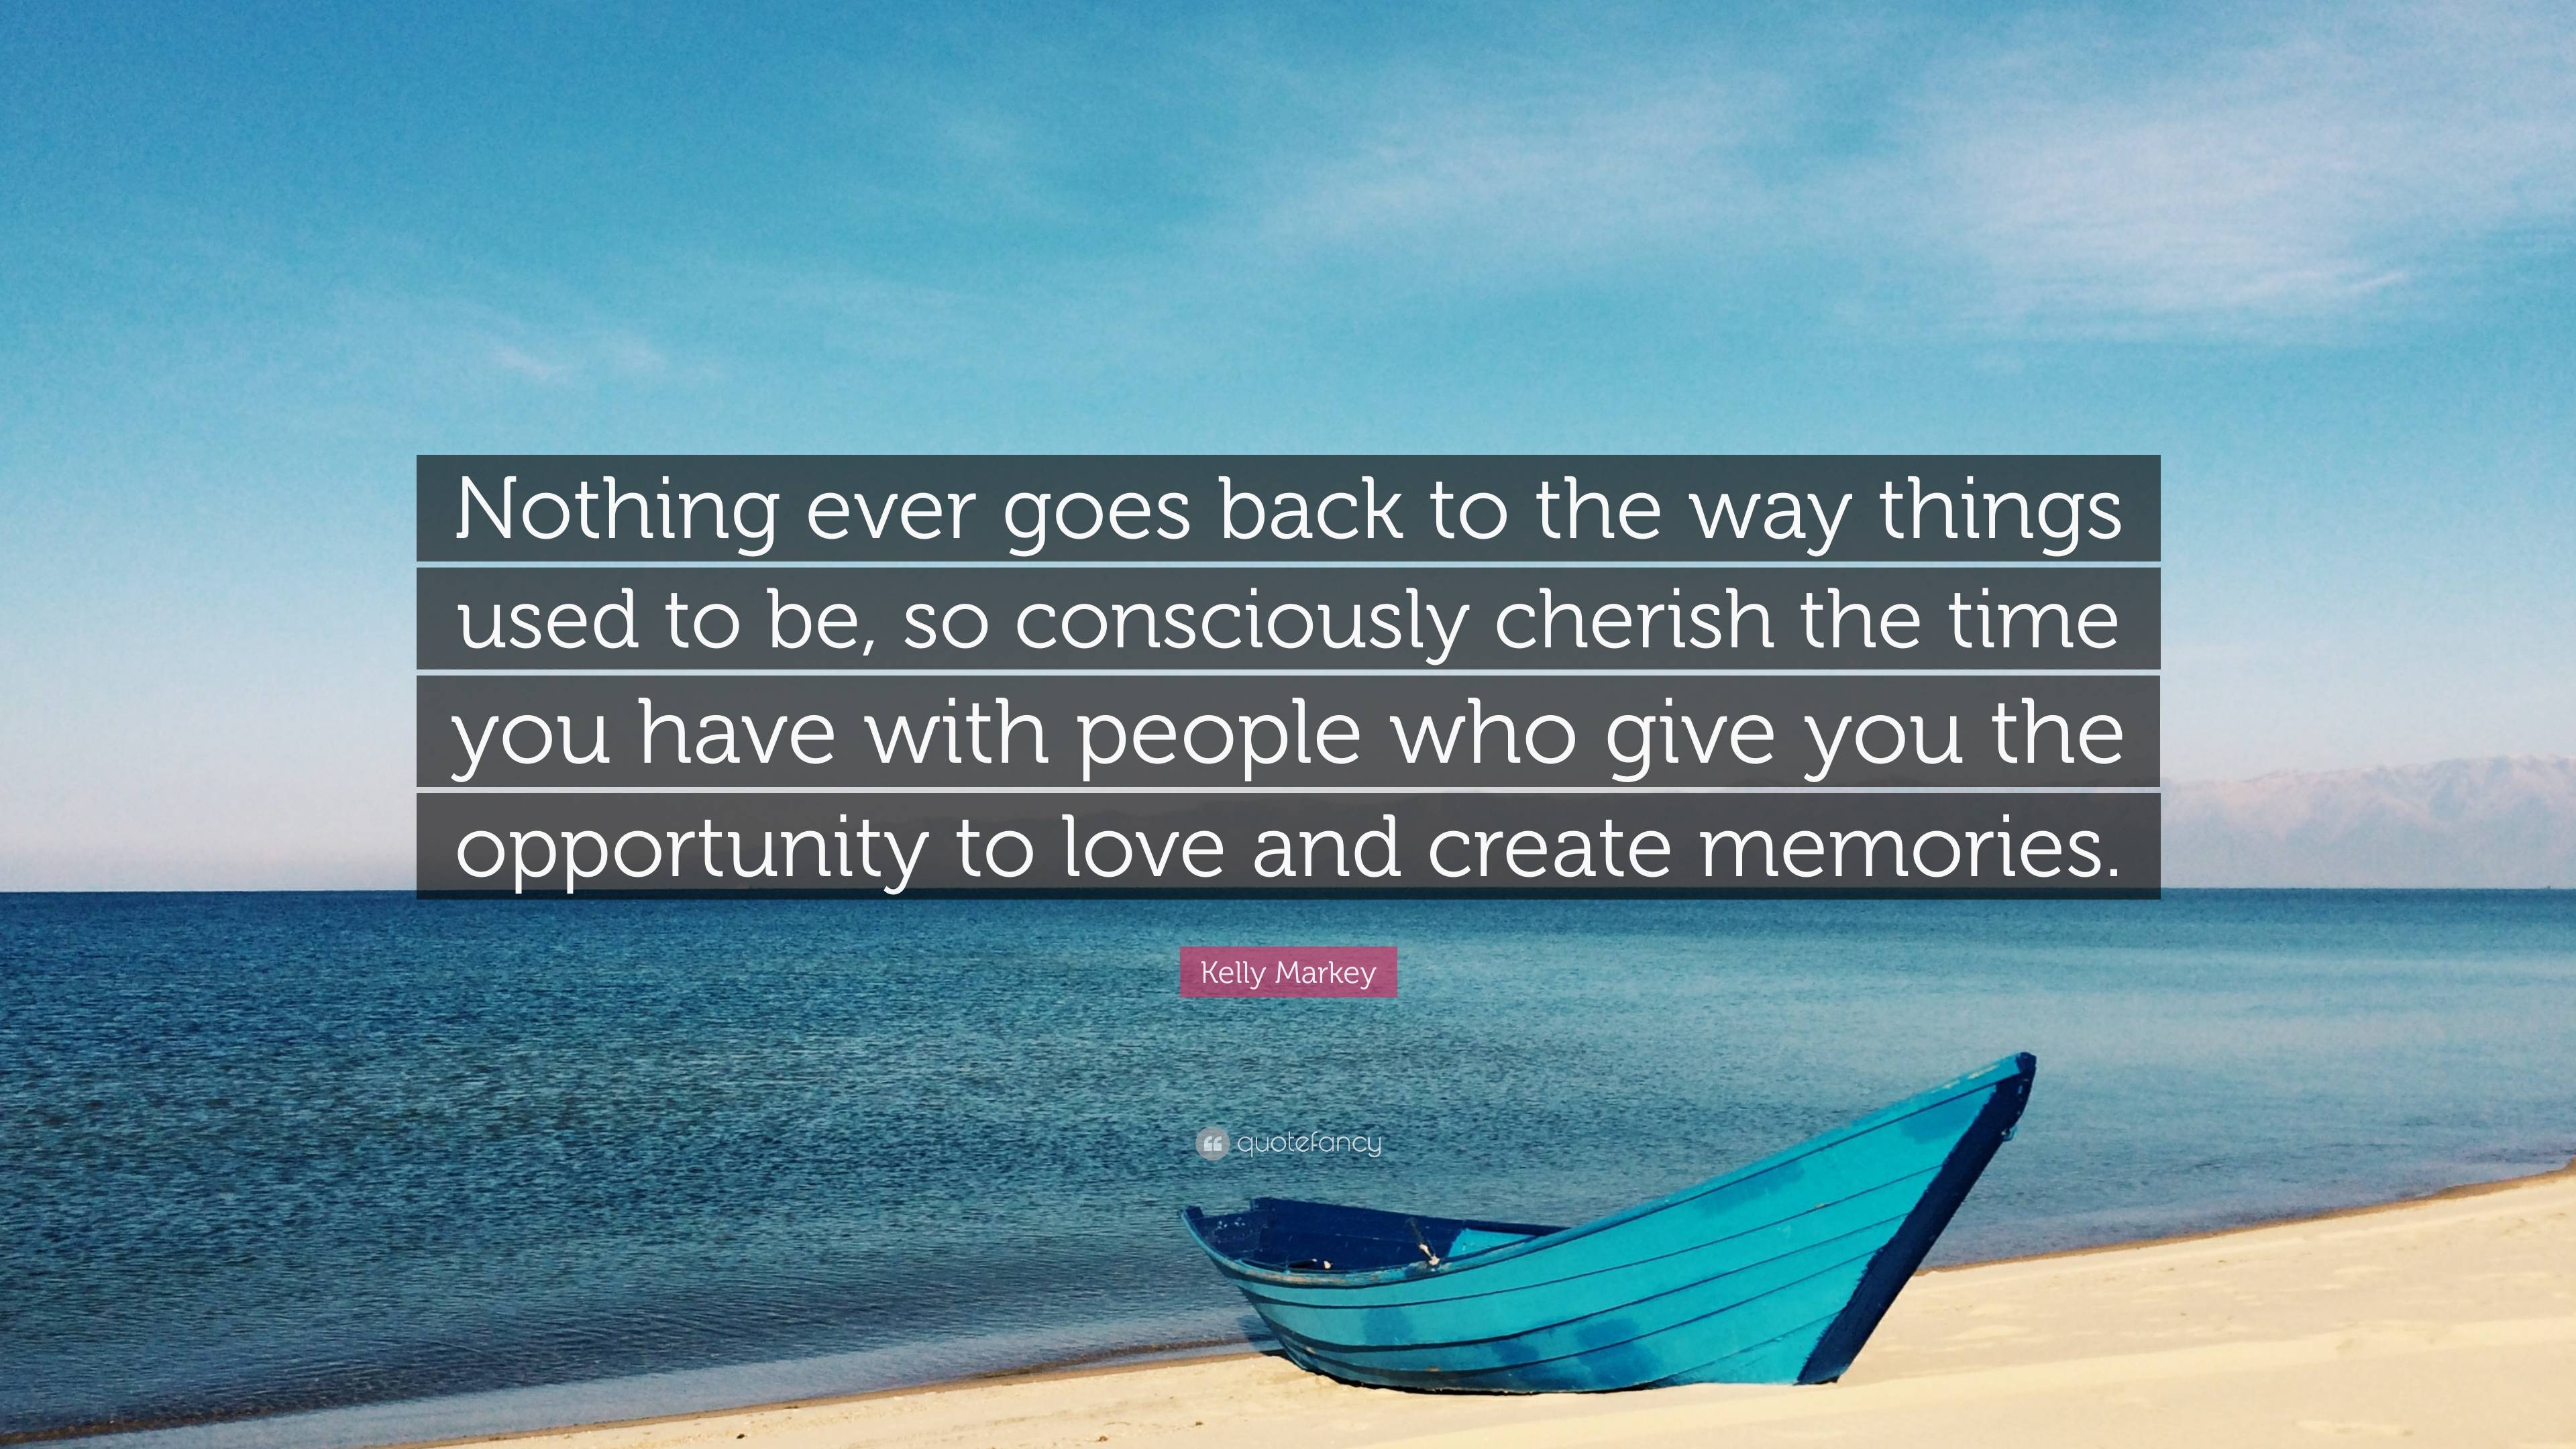 Kelly Markey Quote: “Nothing ever goes back to the way things used to ...